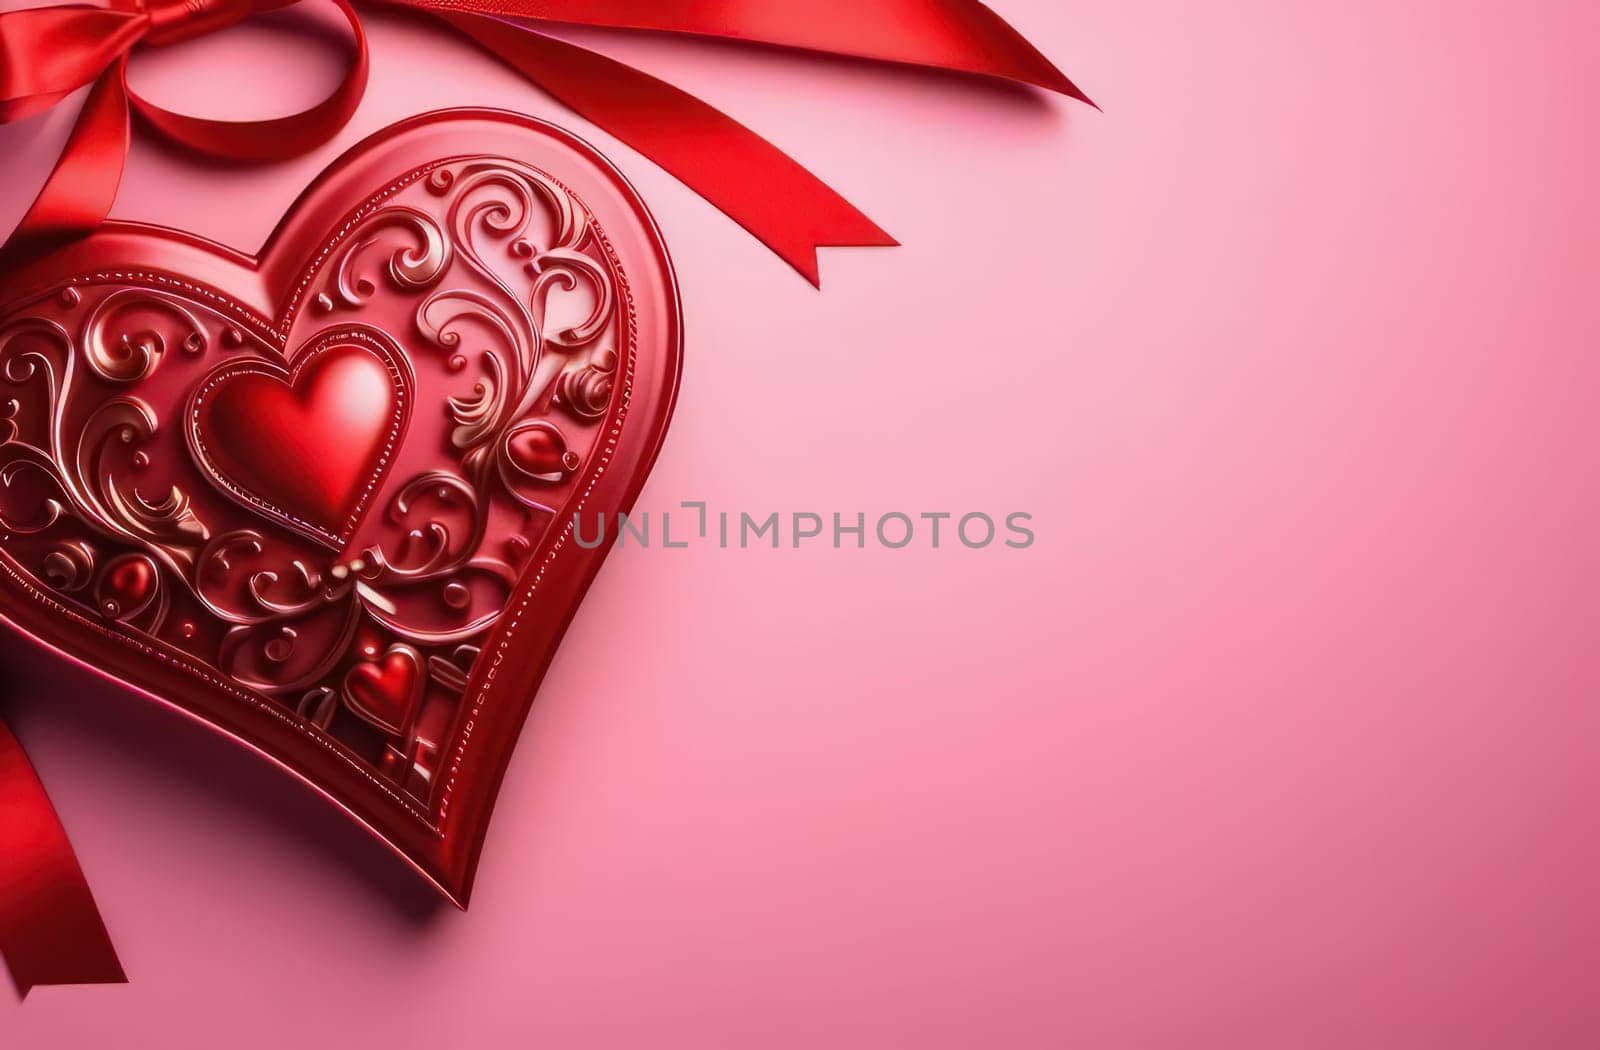 St. Valentines day, wedding banner with red ornamental heart on red background. Use for love sale banner, voucher, greeting card. Copy space. Beautiful love background for valentines day greeting card